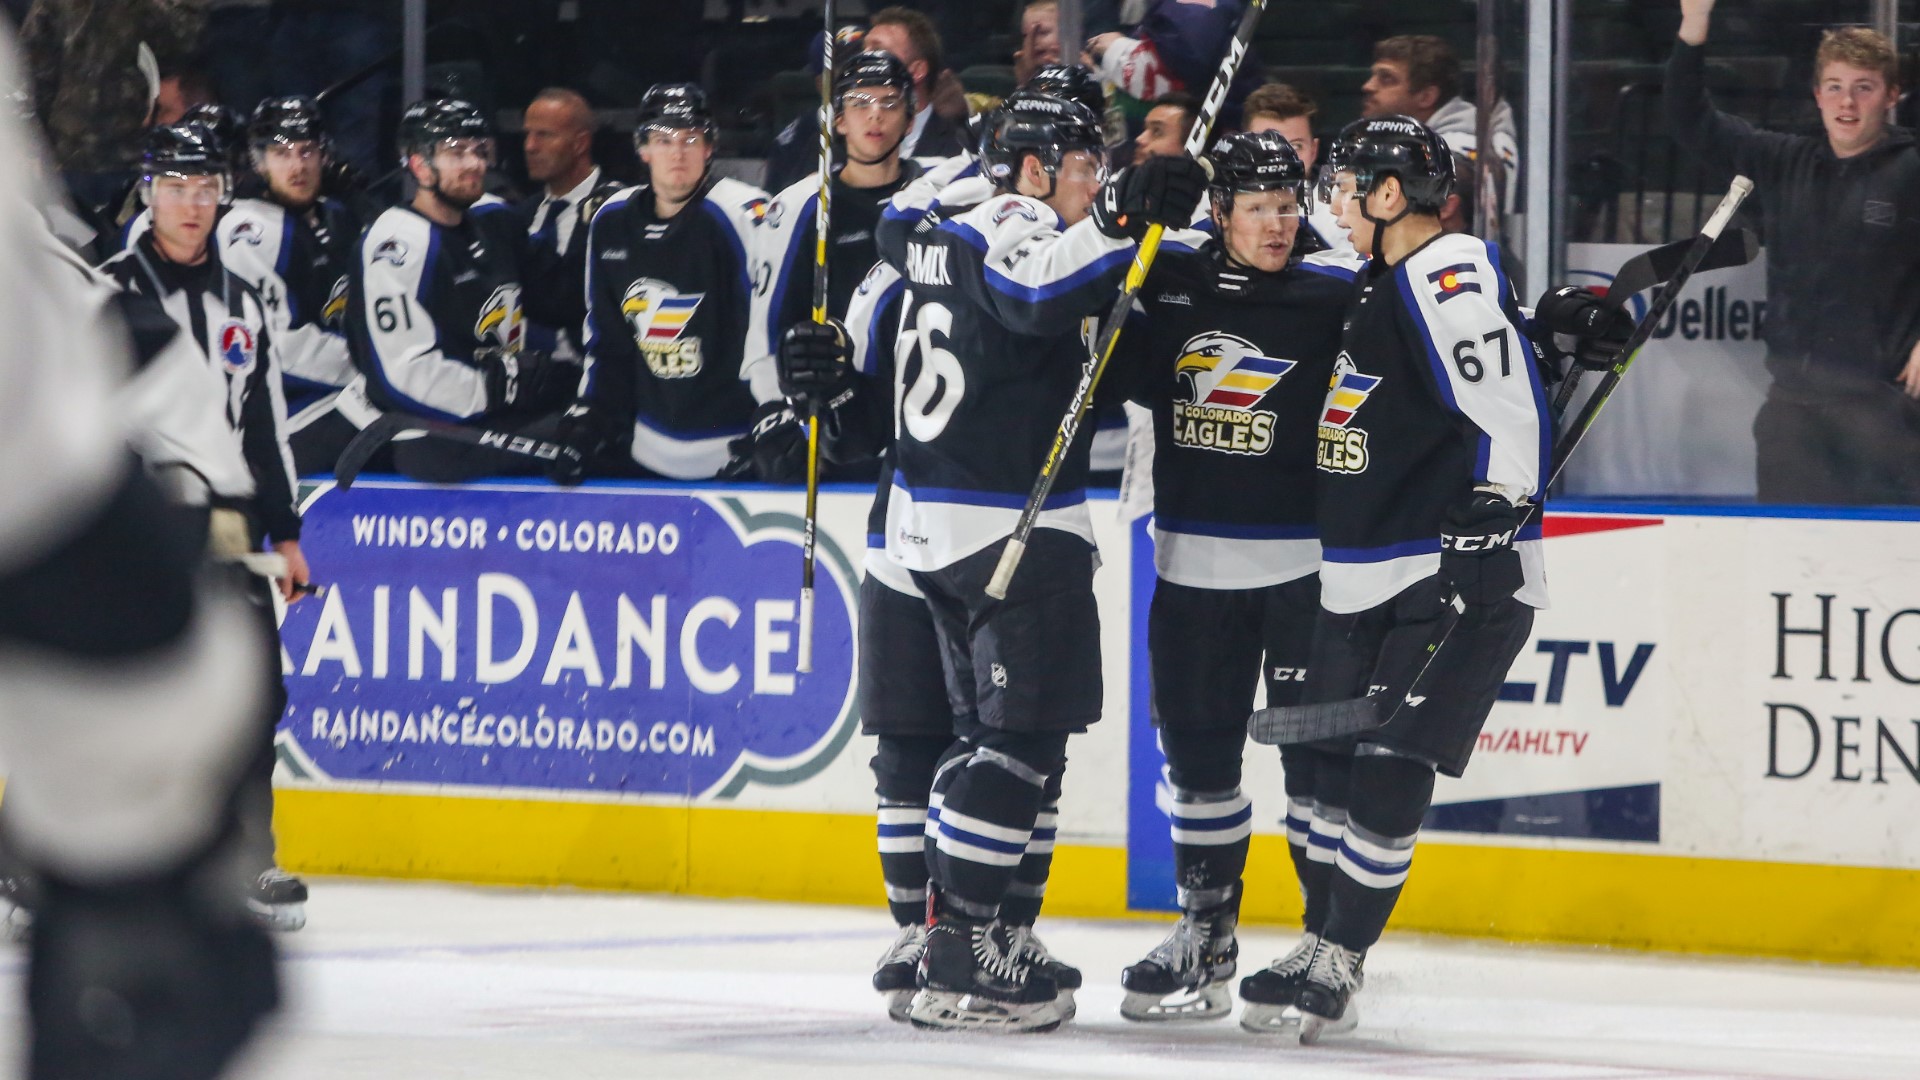 Colorado Eagles punch their ticket to the AHL playoffs